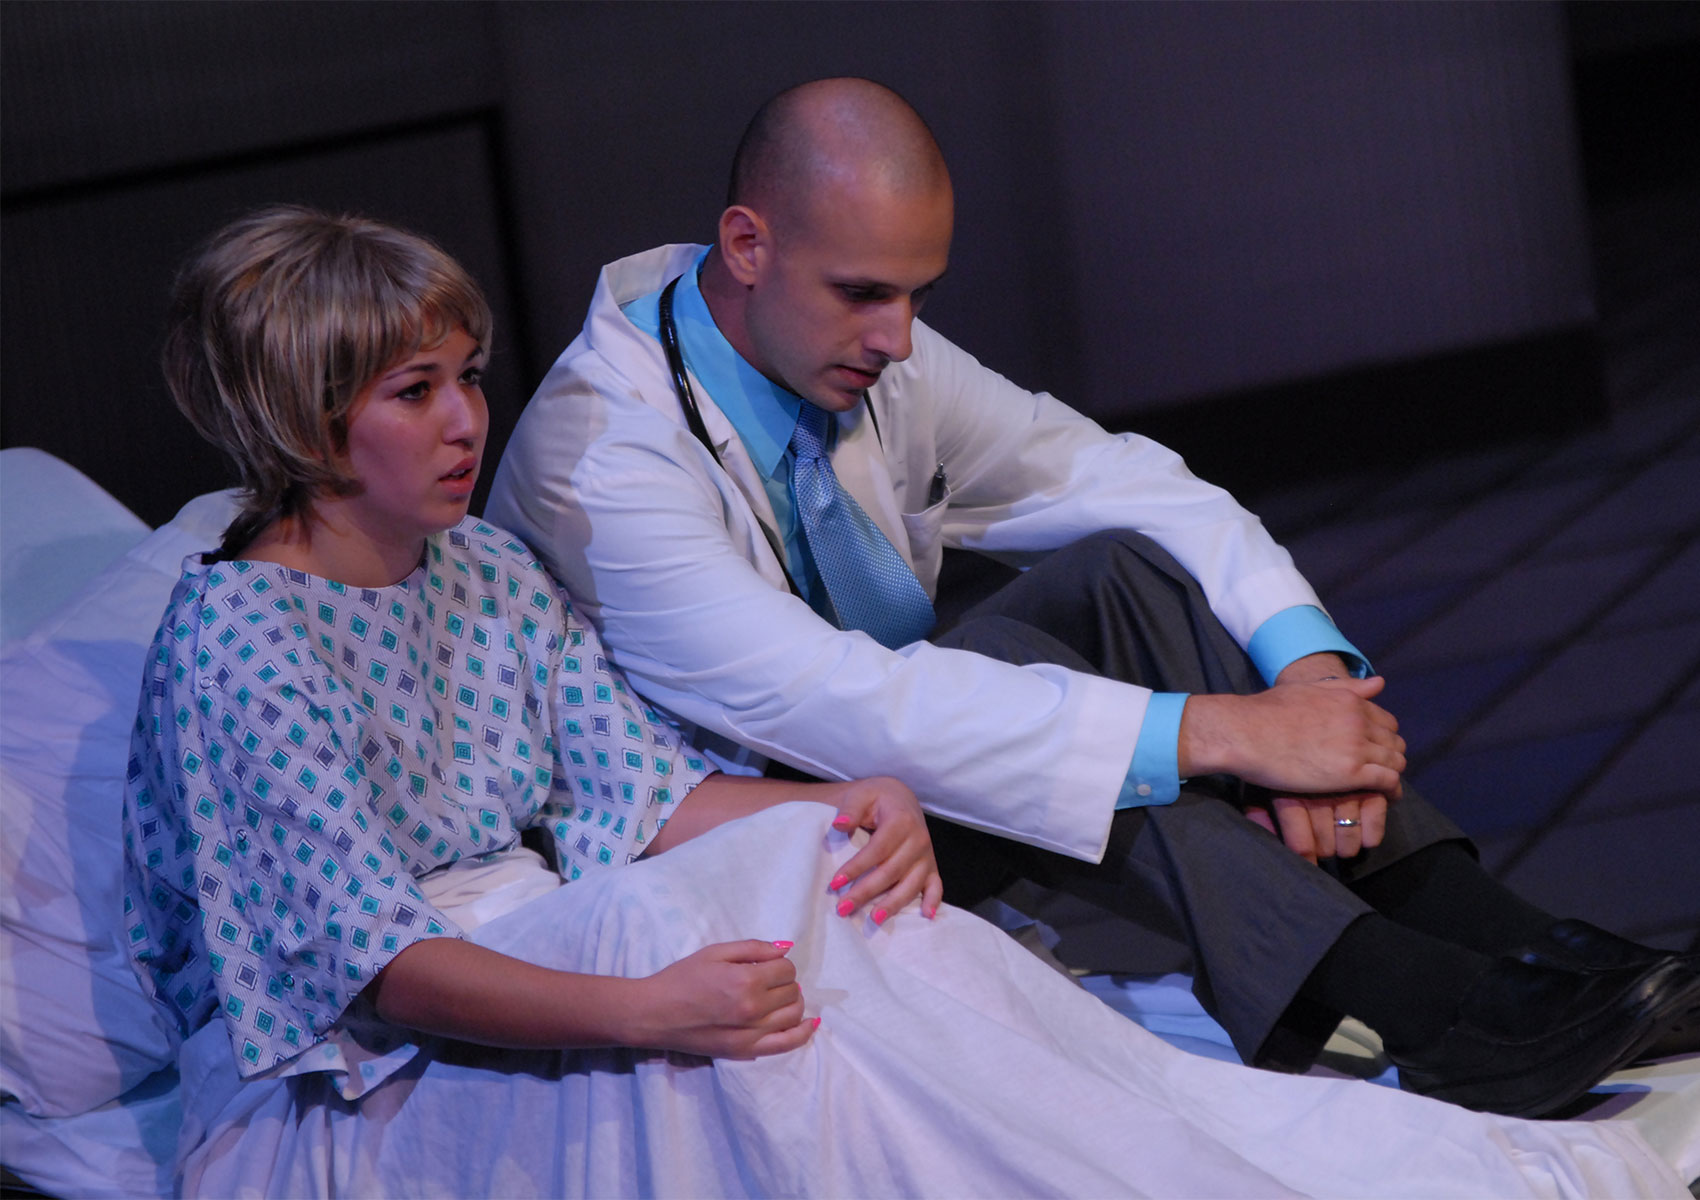 A woman sits in a hospital bed covered in a cloth while holding her knees, staring outward. A man dressed as a doctor sits next to the woman, looking down.